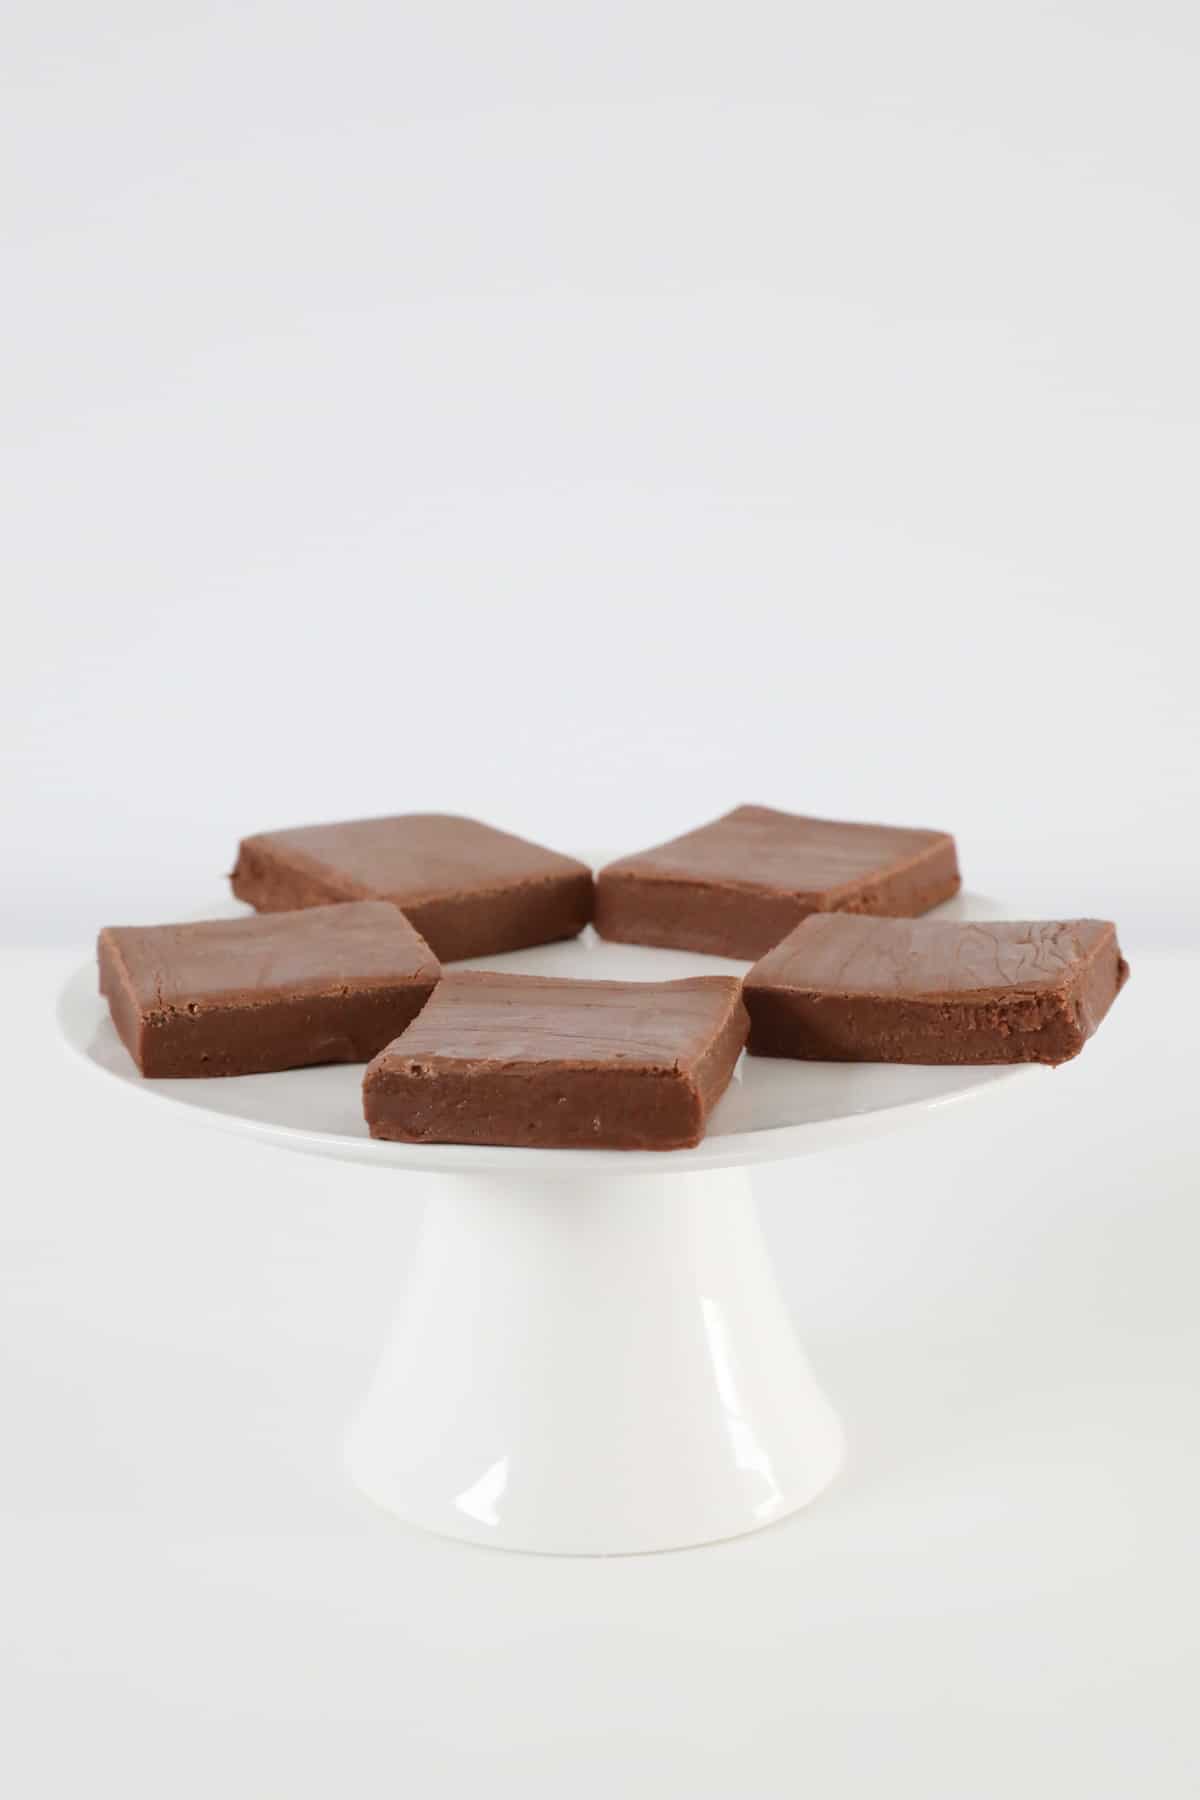 A cake stand topped with chocolate fudge.